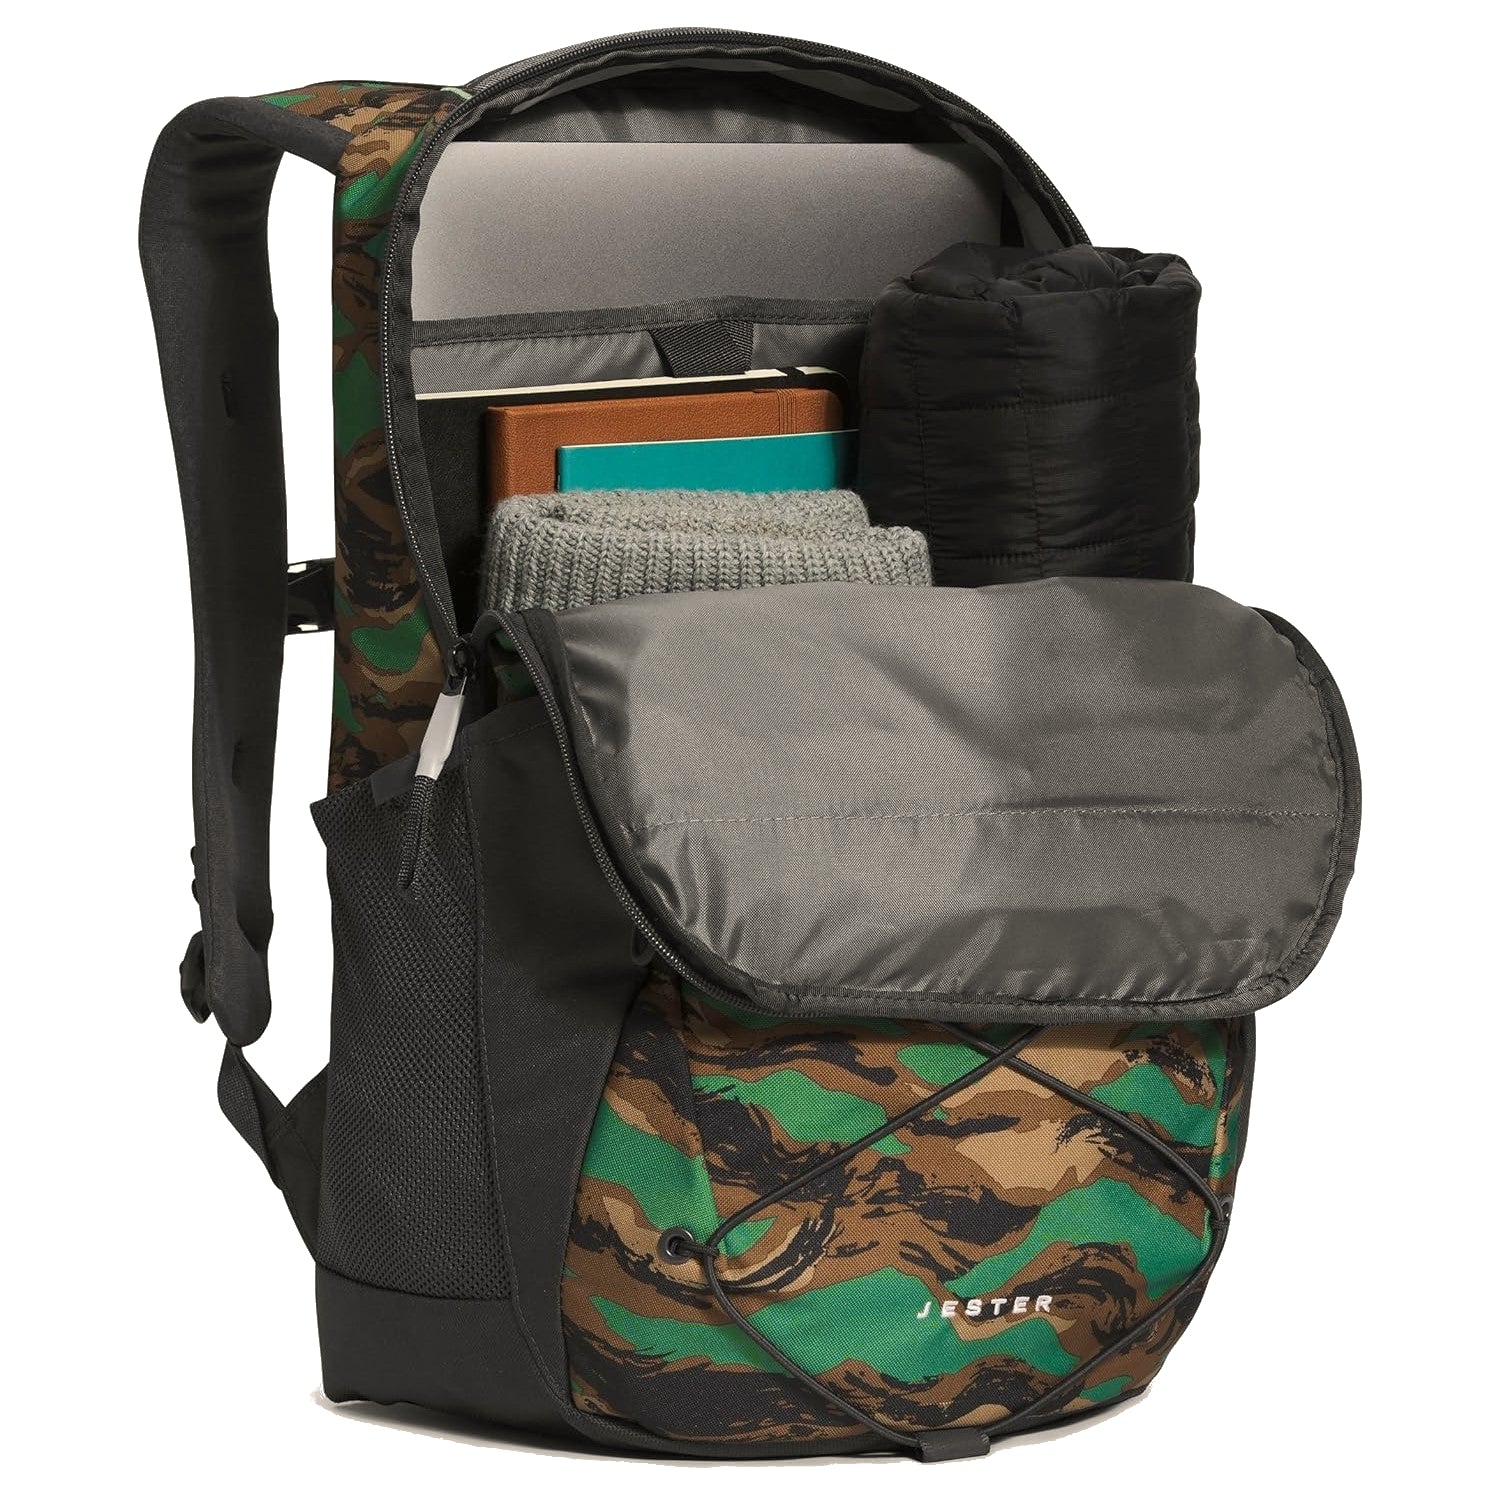 North Face Jester Backpack